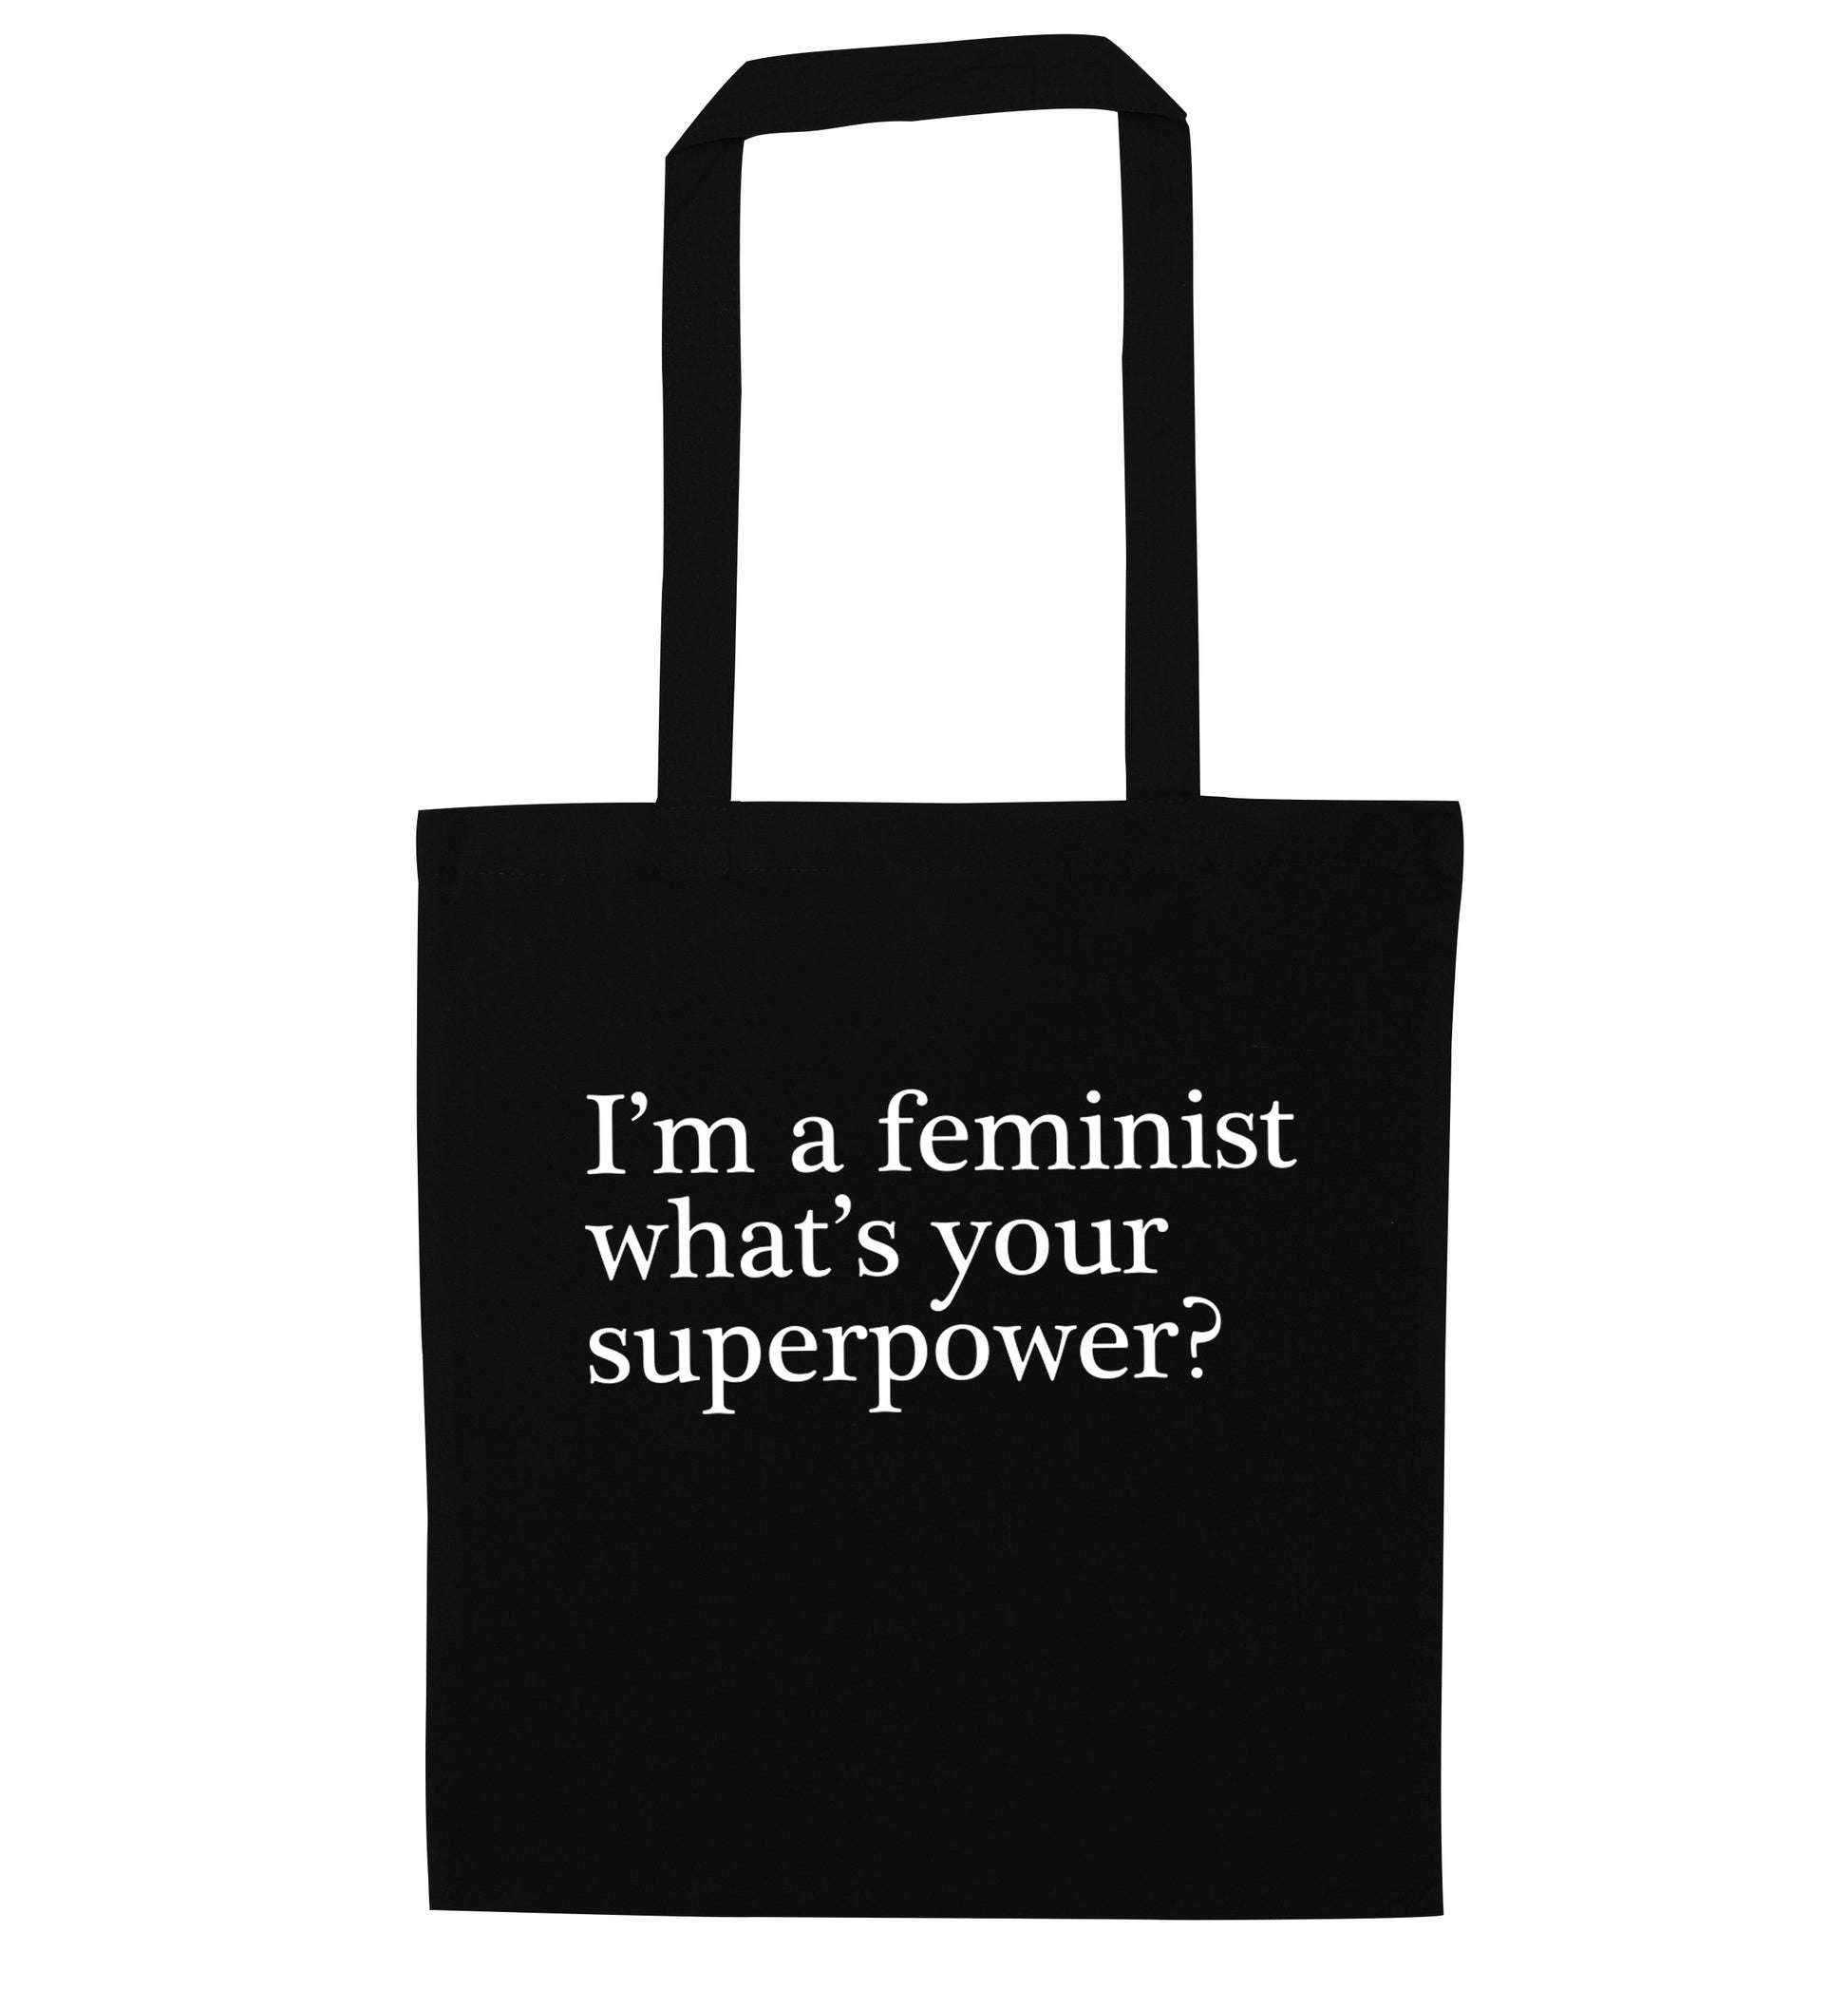 I'm a feminist what's your superpower? black tote bag